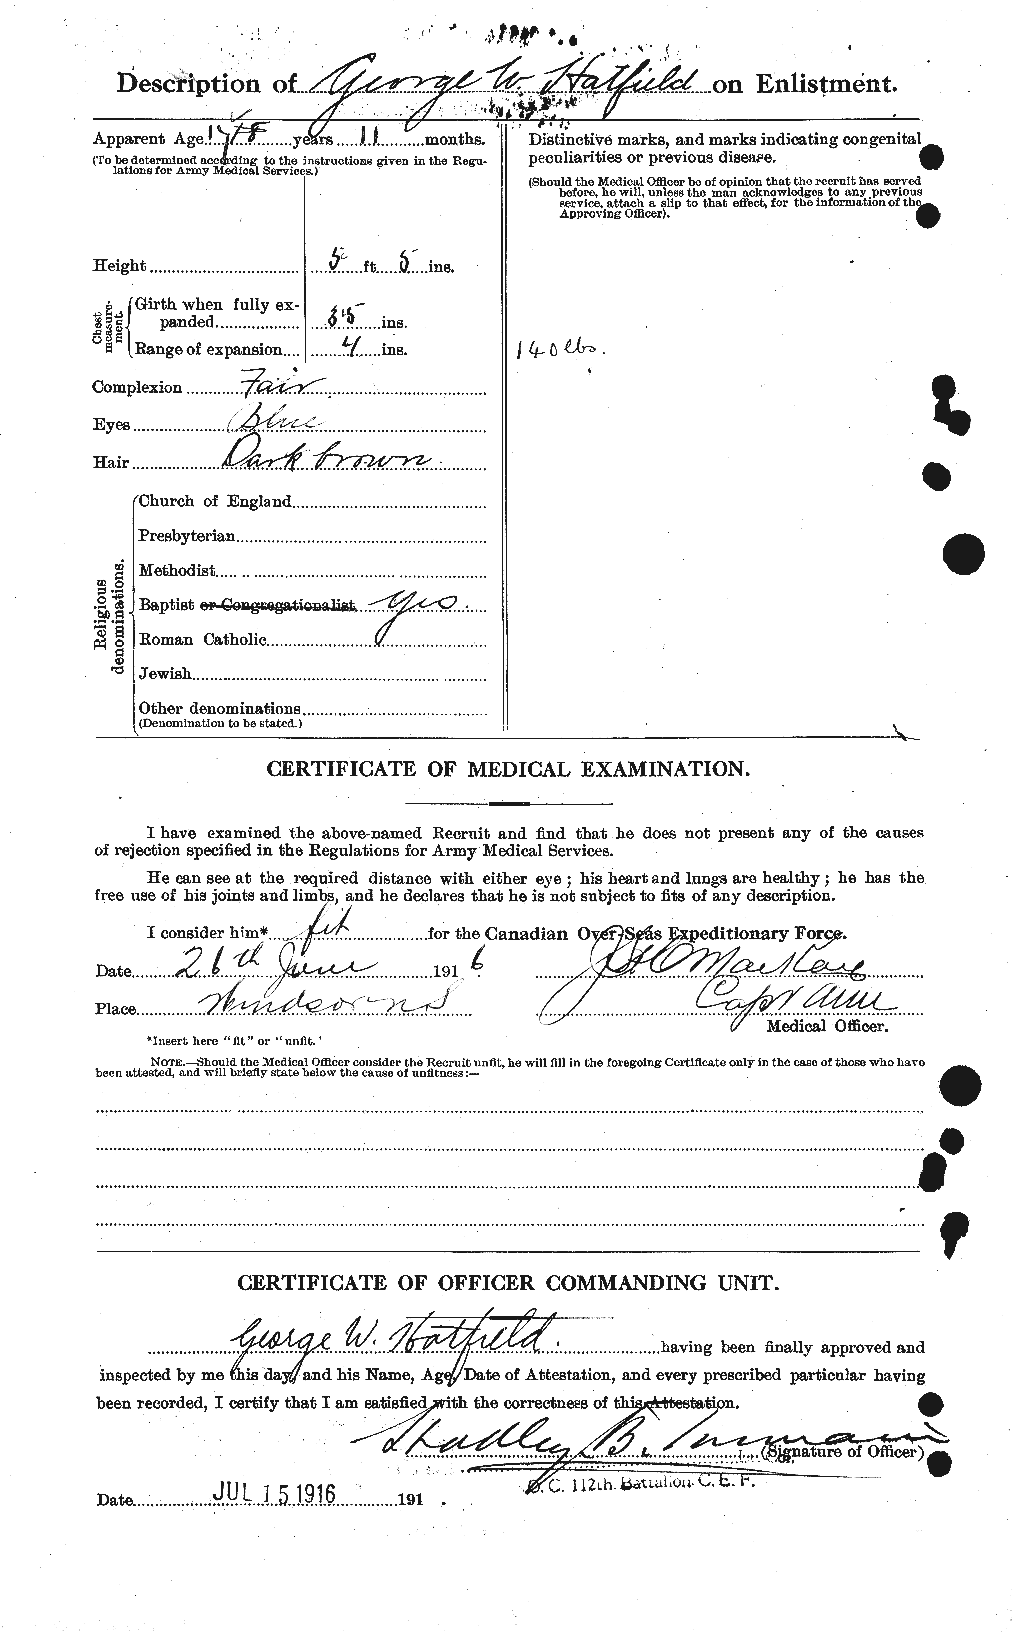 Personnel Records of the First World War - CEF 388799b